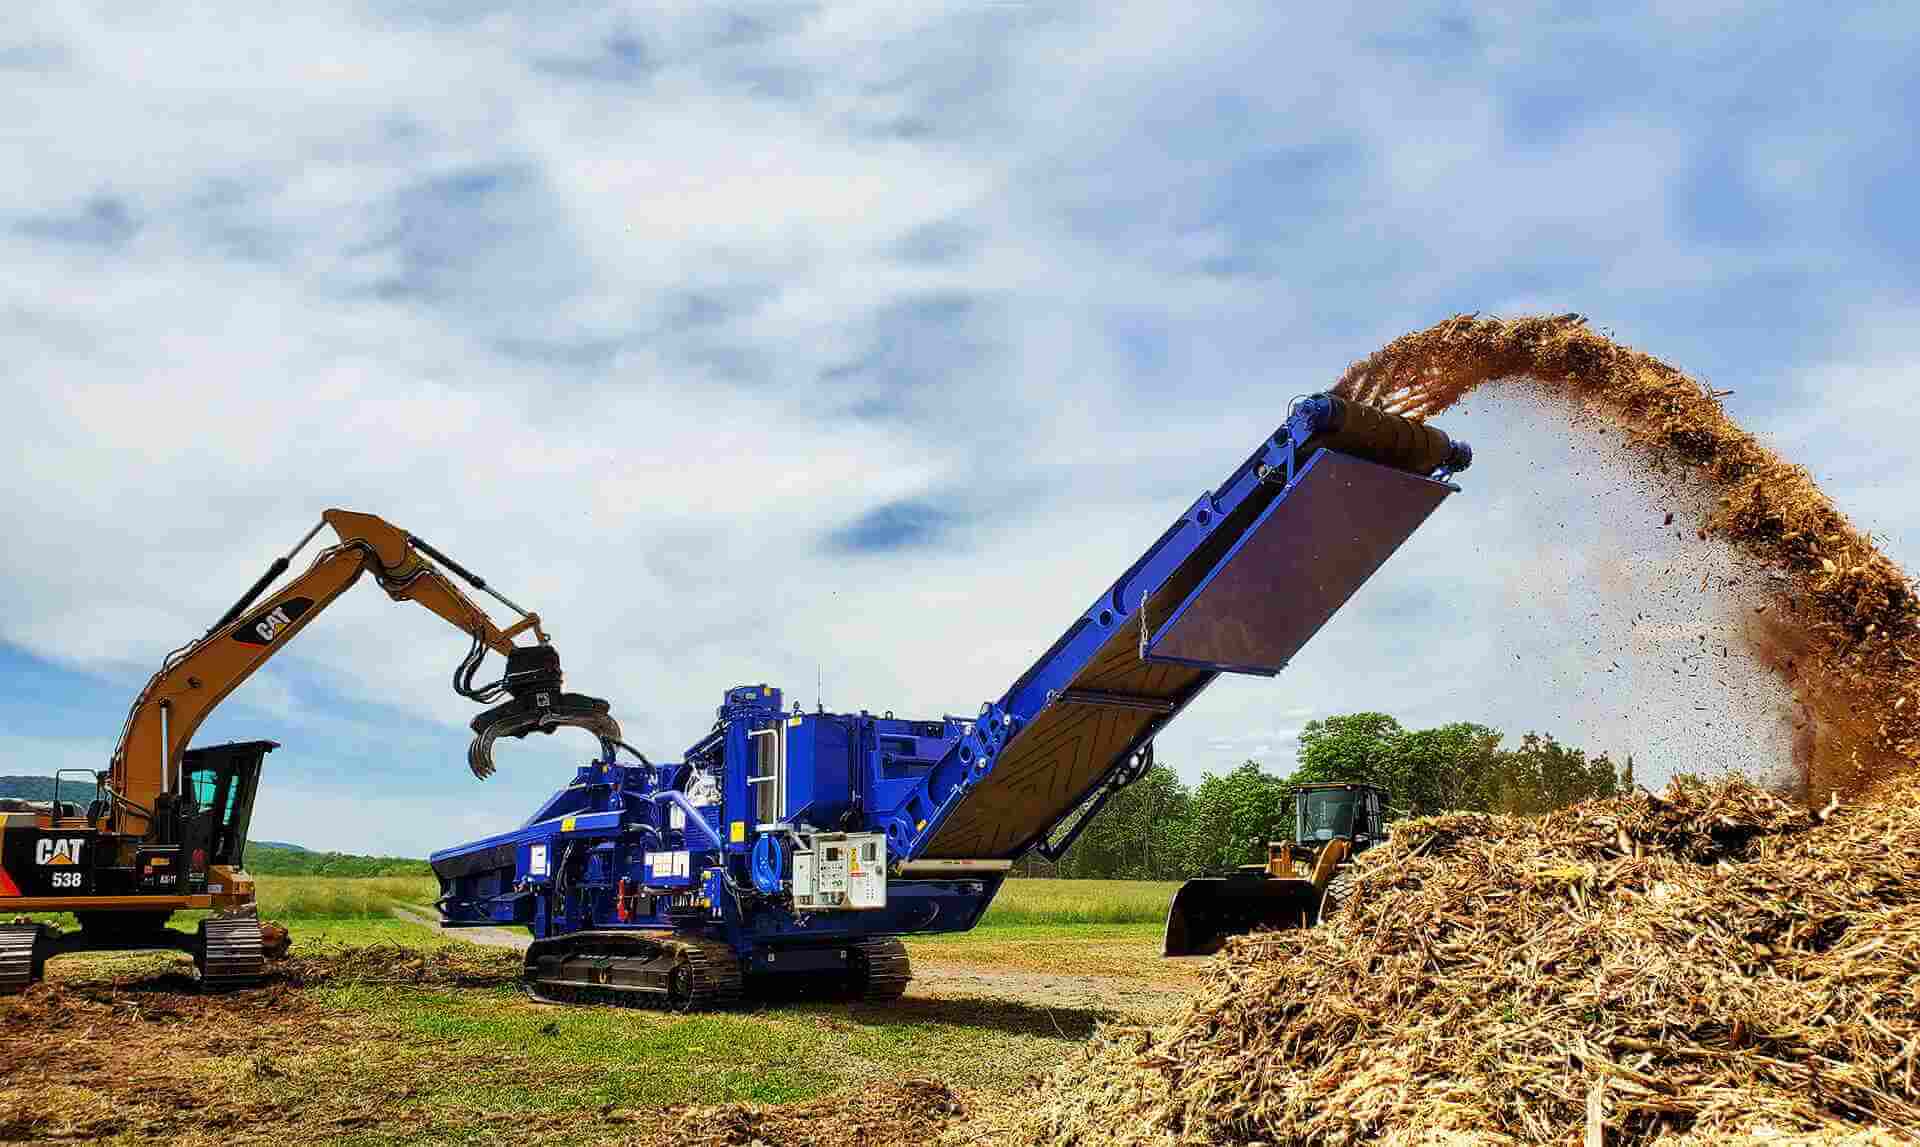 Astec Peterson 5710D Horizontal Grinder making biomass in Pennsylvania with a grapple loading excavator.